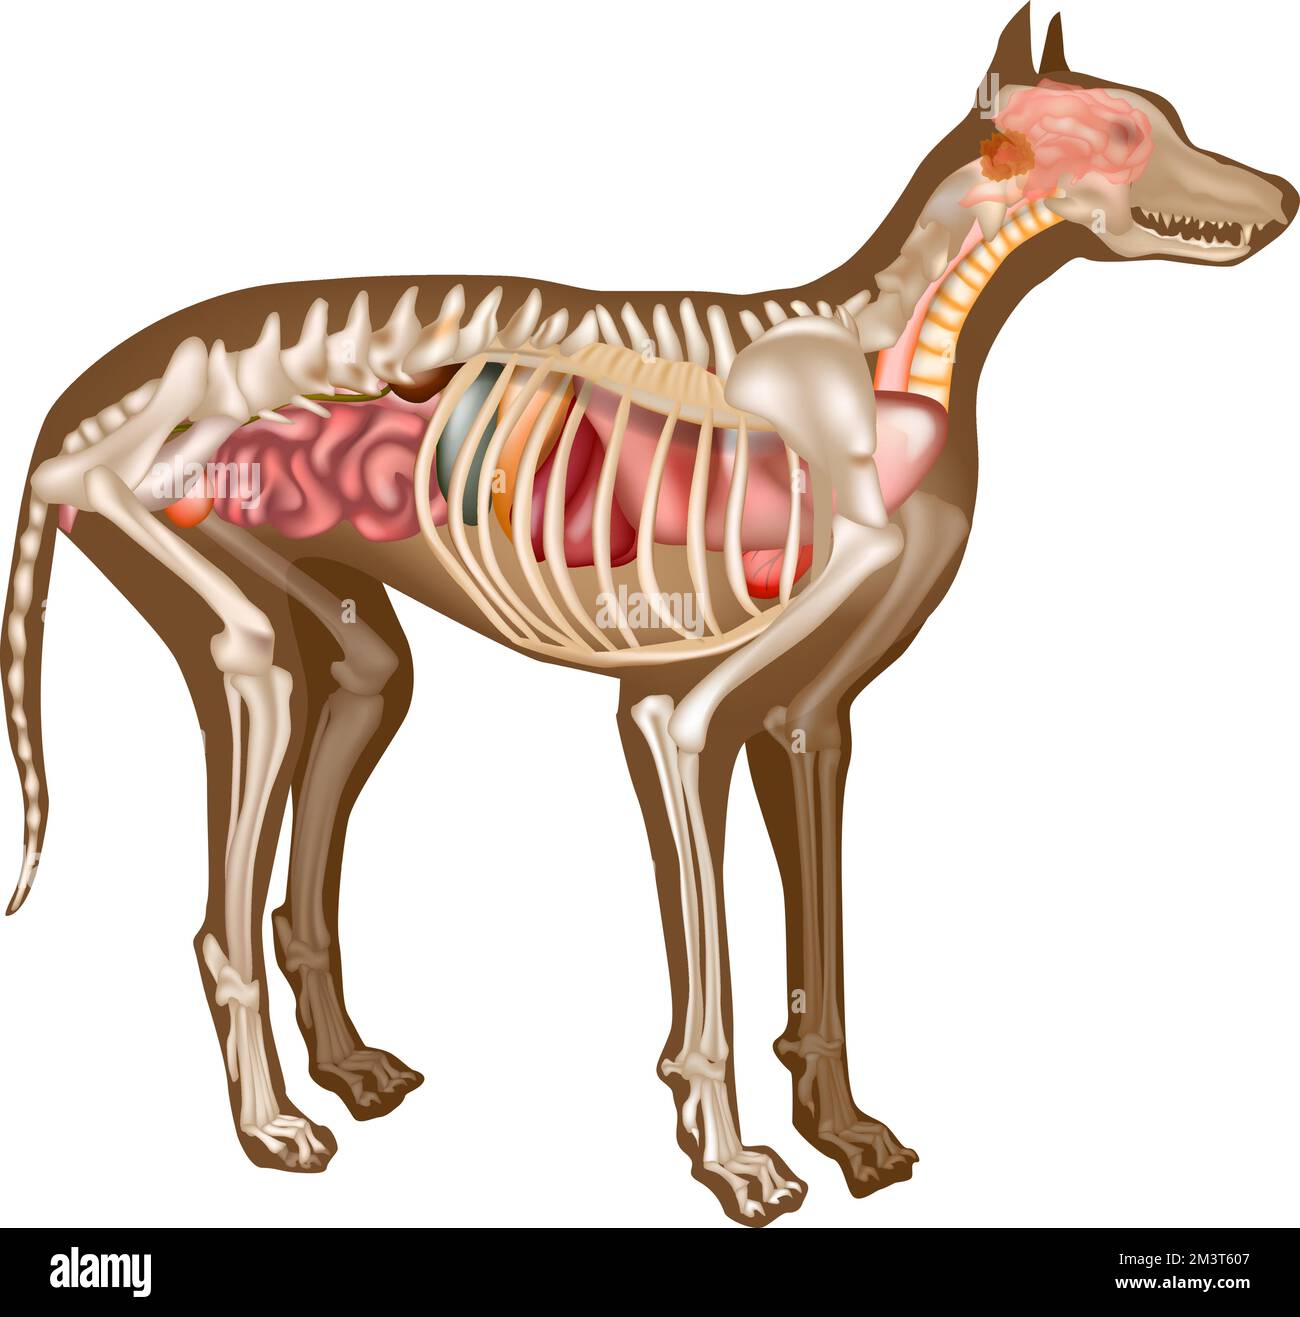 Canine Internal Anatomy Chart. Anatomy of dog with inside organ structure examination vector illustration. Canine skeleton veterinary. Stock Vector